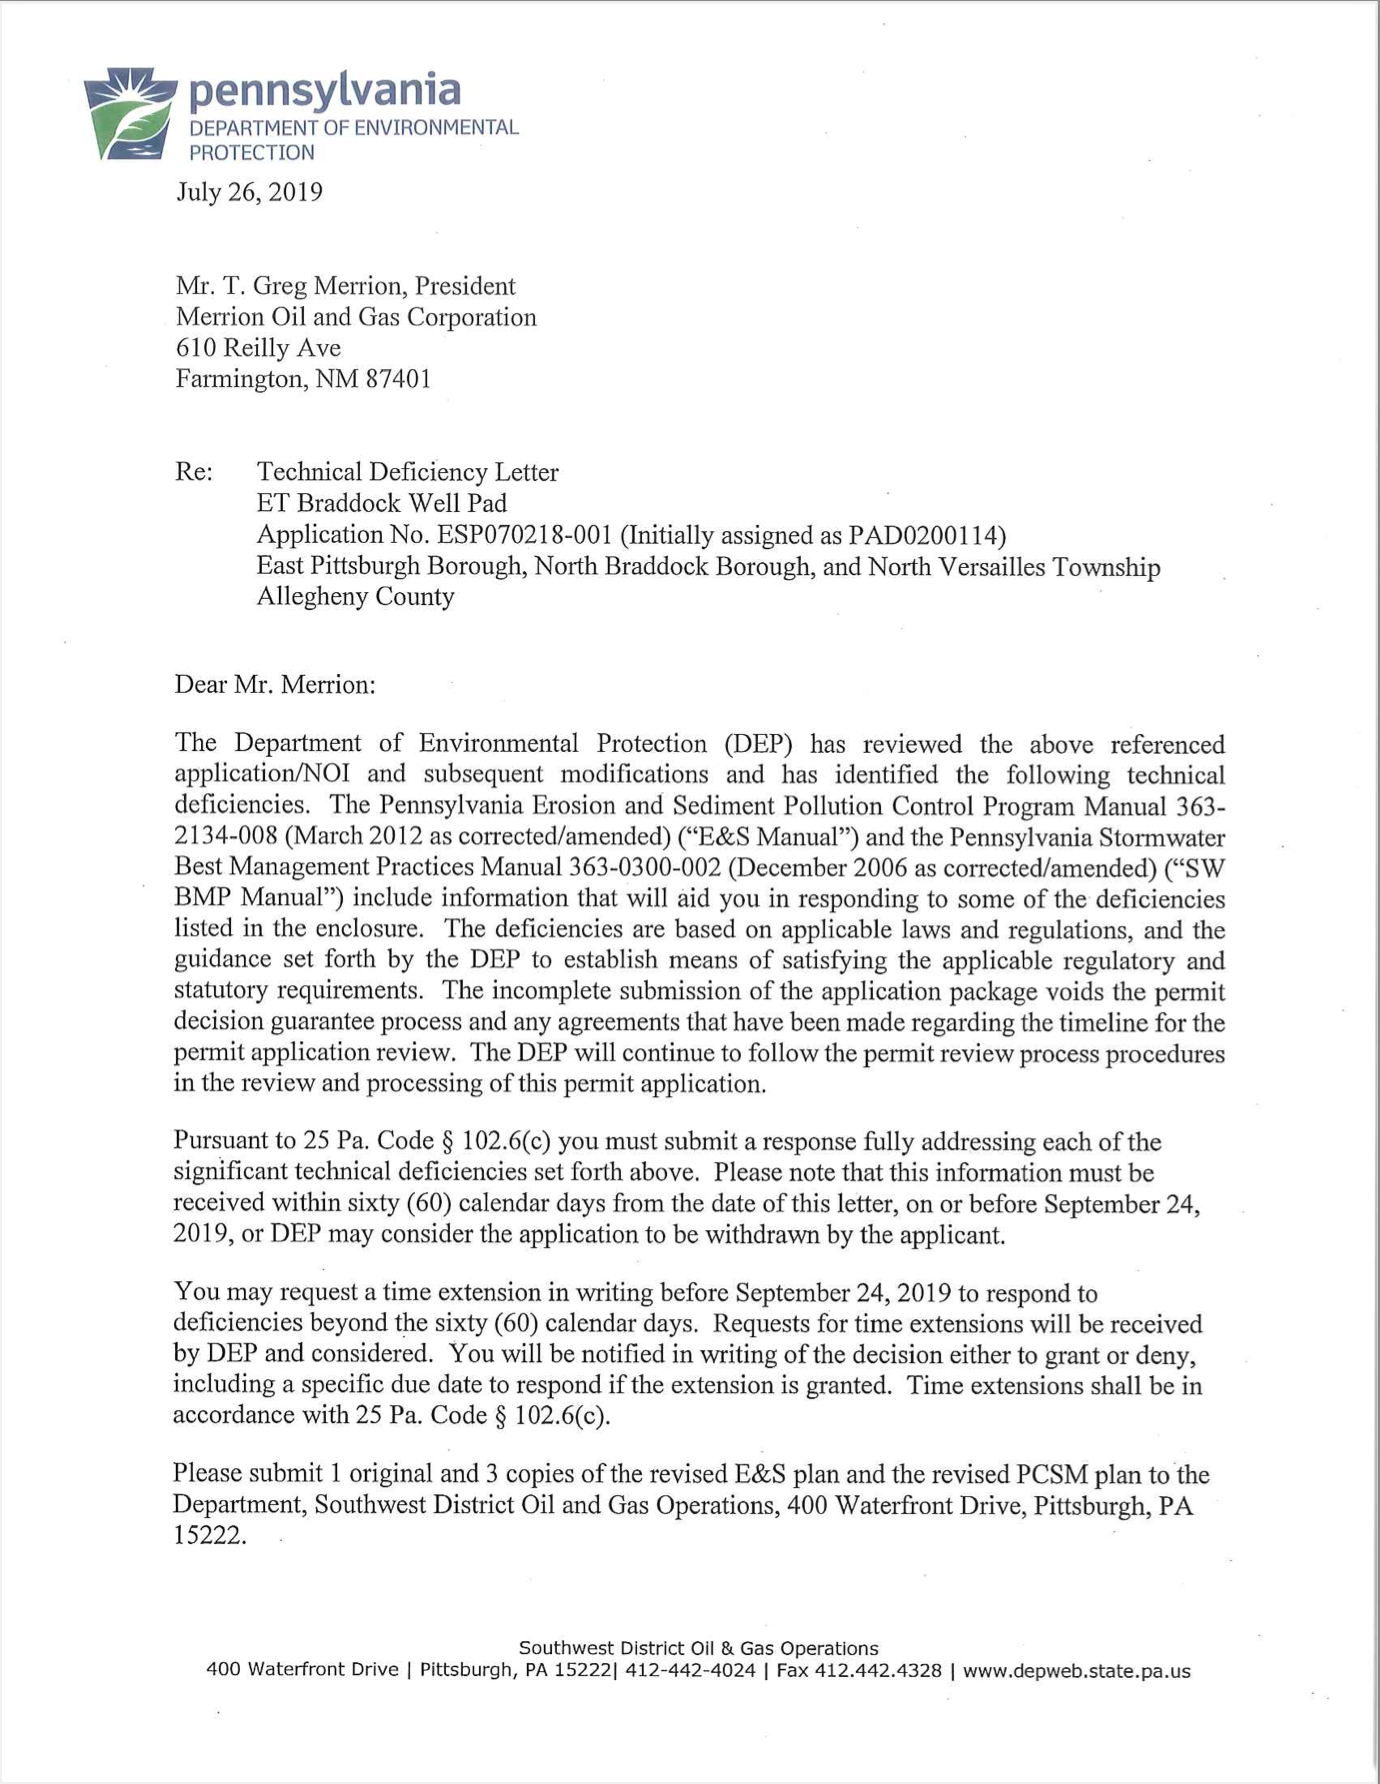 PA Department of Environmental Protection Technical Deficiency Letter